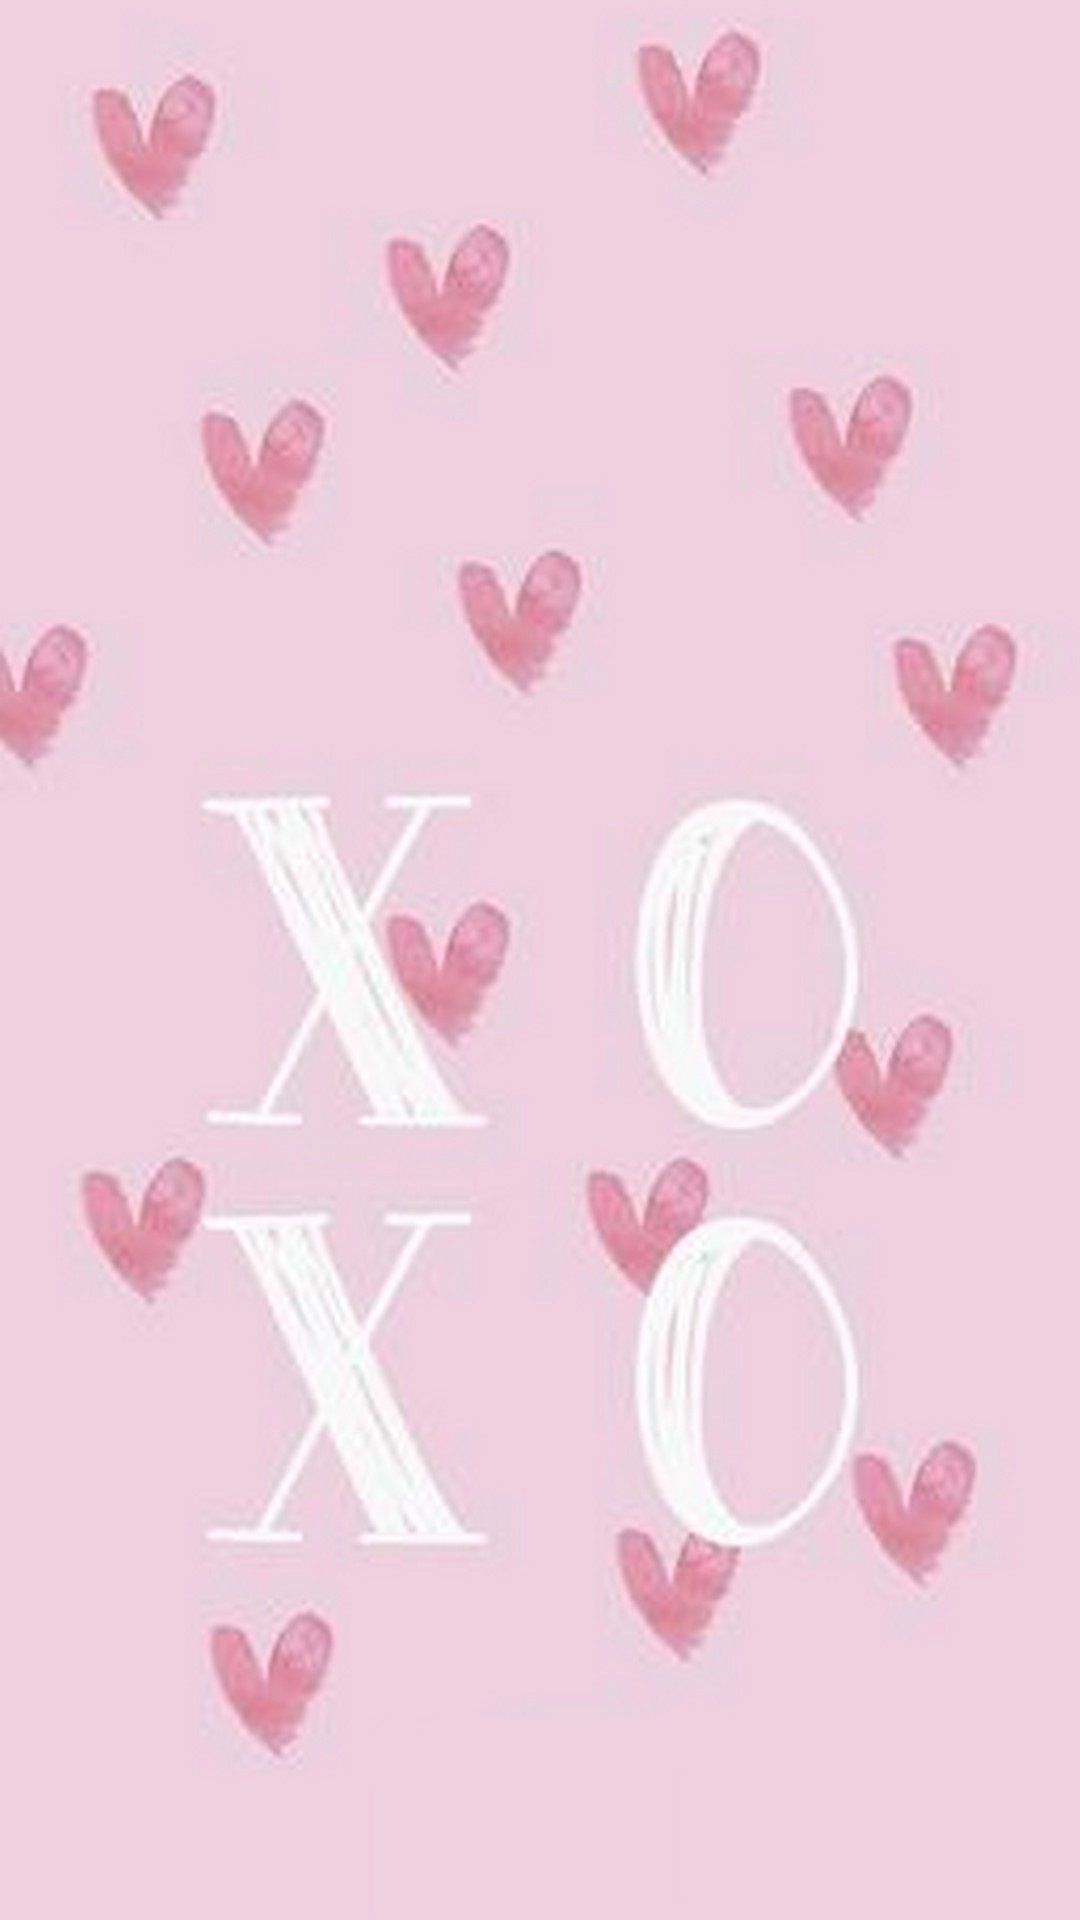 Free Download Valentines Day Iphone Wallpapers Top Valentines Day 1080x1920 For Your Desktop Mobile Tablet Explore 64 Cute Valentines Day Backgrounds Animal Valentines Wallpaper See more ideas about wallpaper, valentines wallpaper, heart wallpaper. free download valentines day iphone